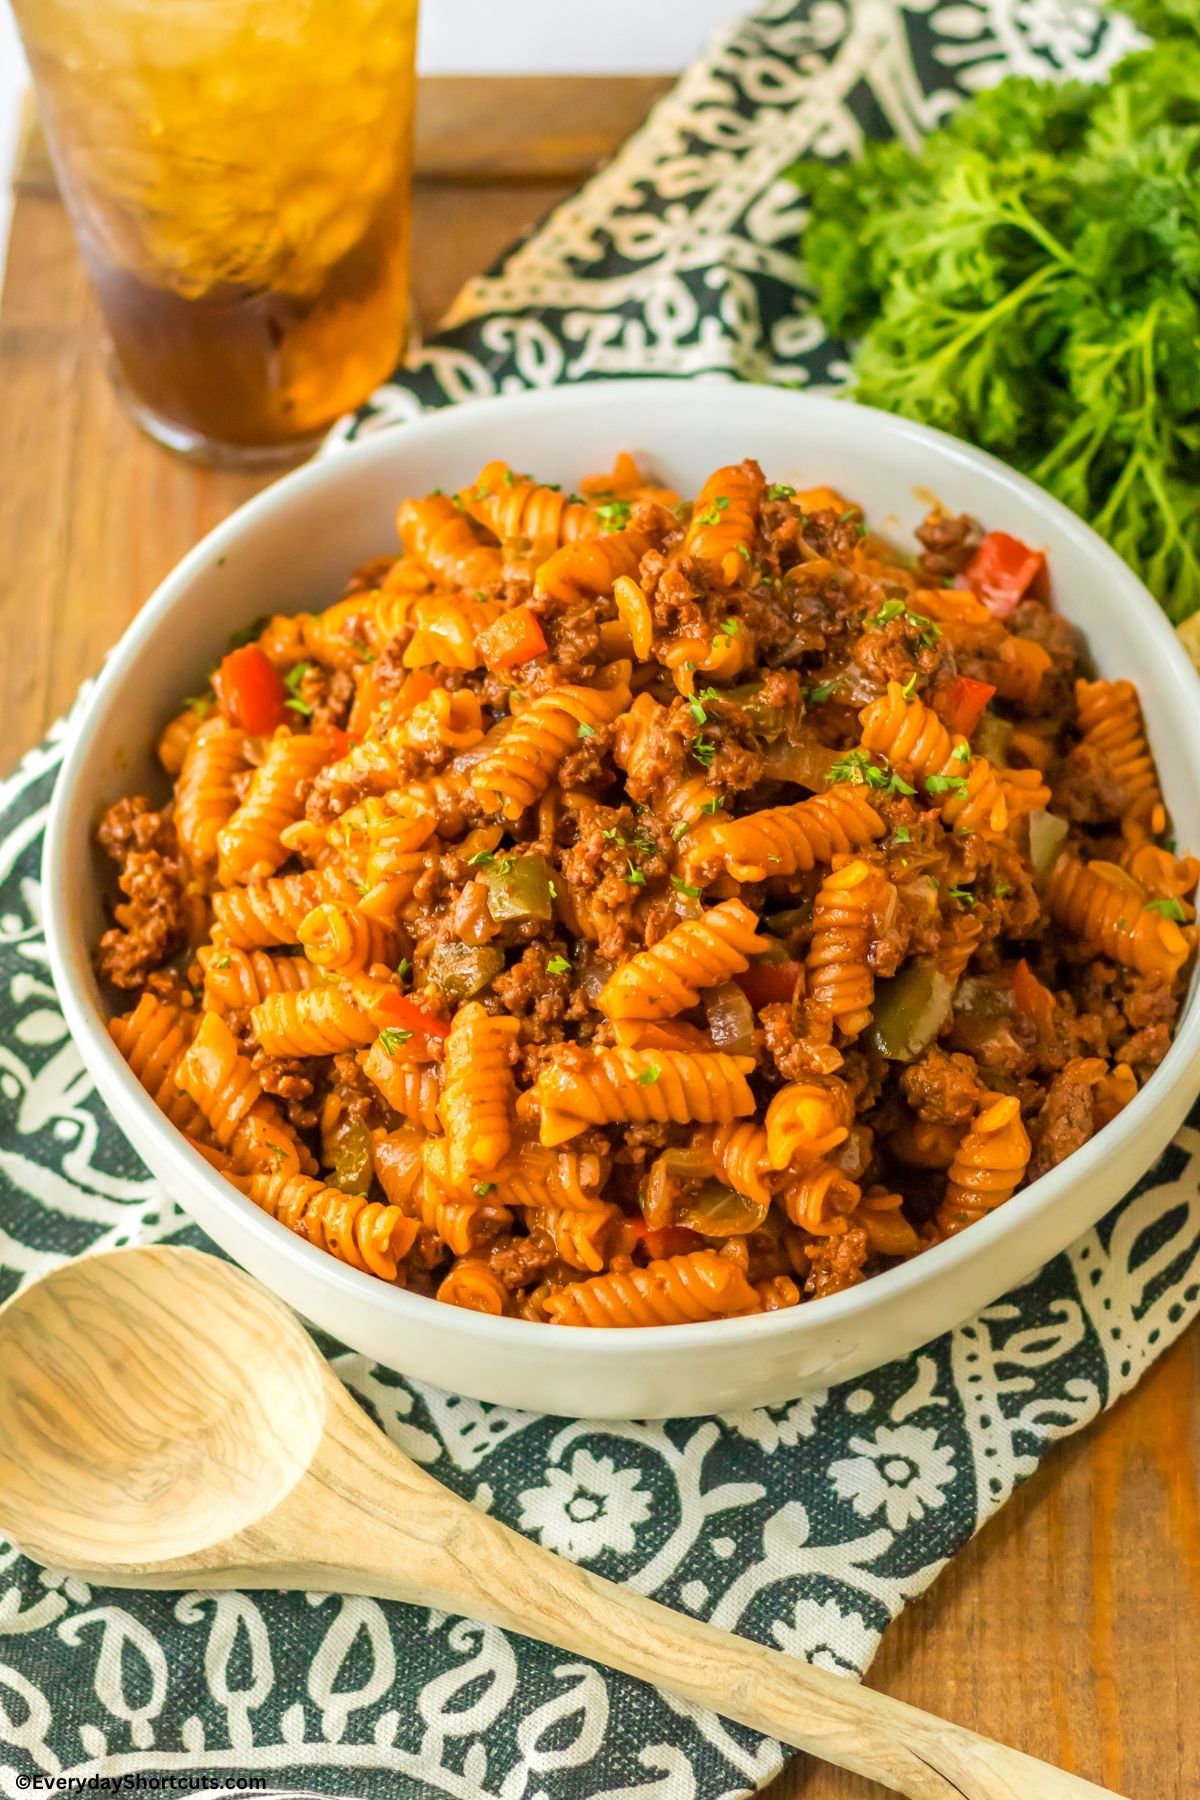 pasta with sloppy joe in a bowl